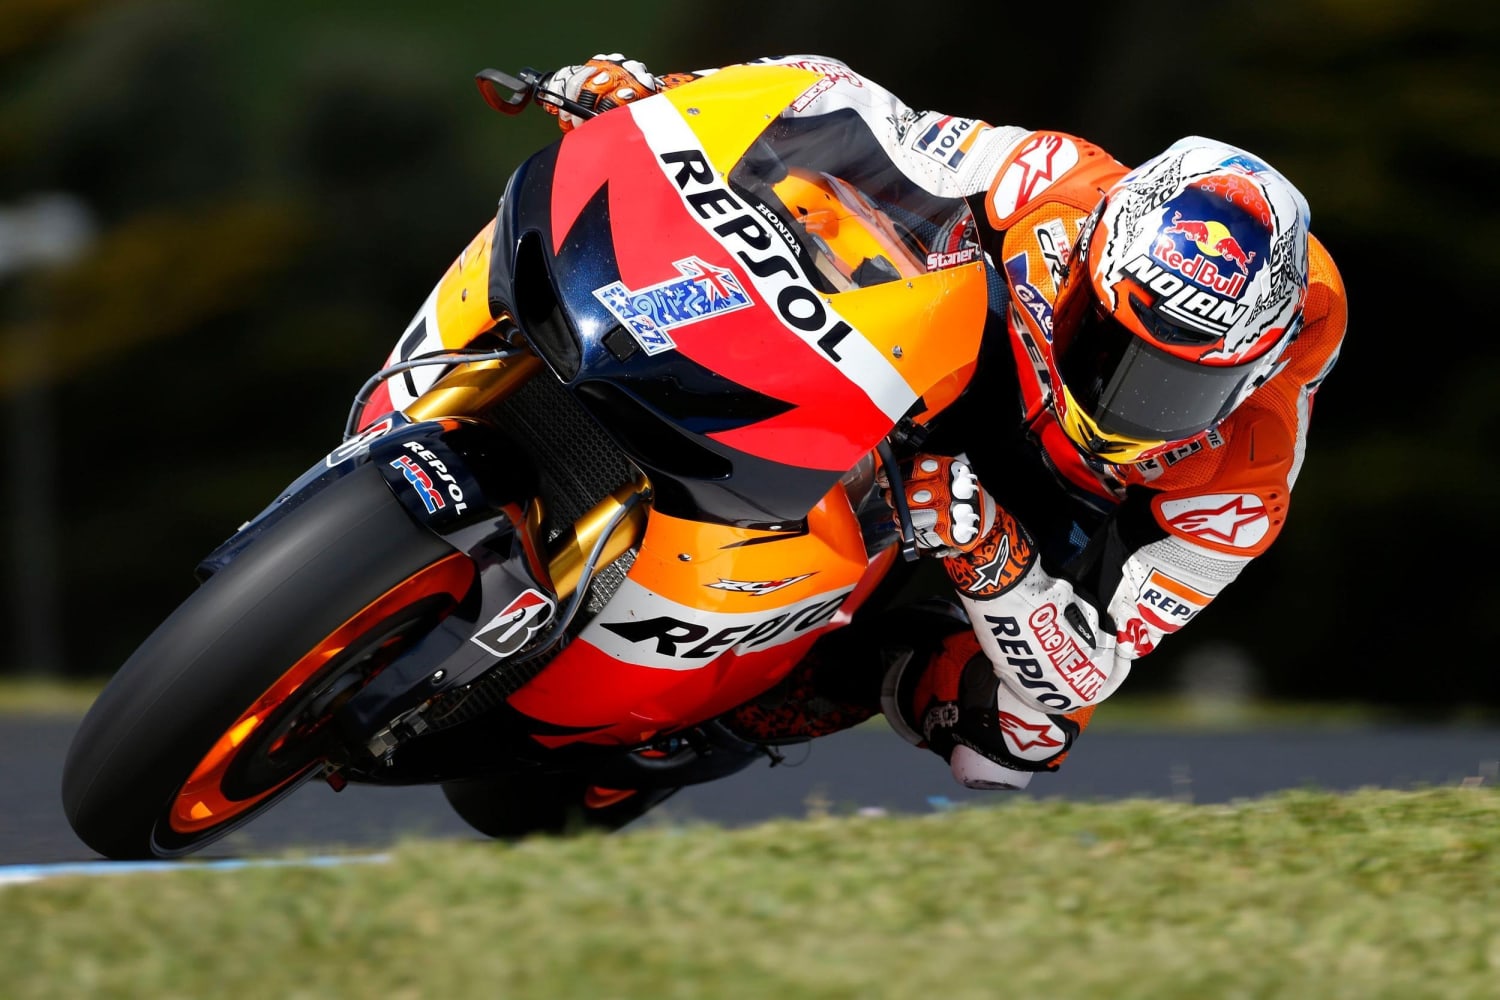 Whats so special about Casey Stoner?